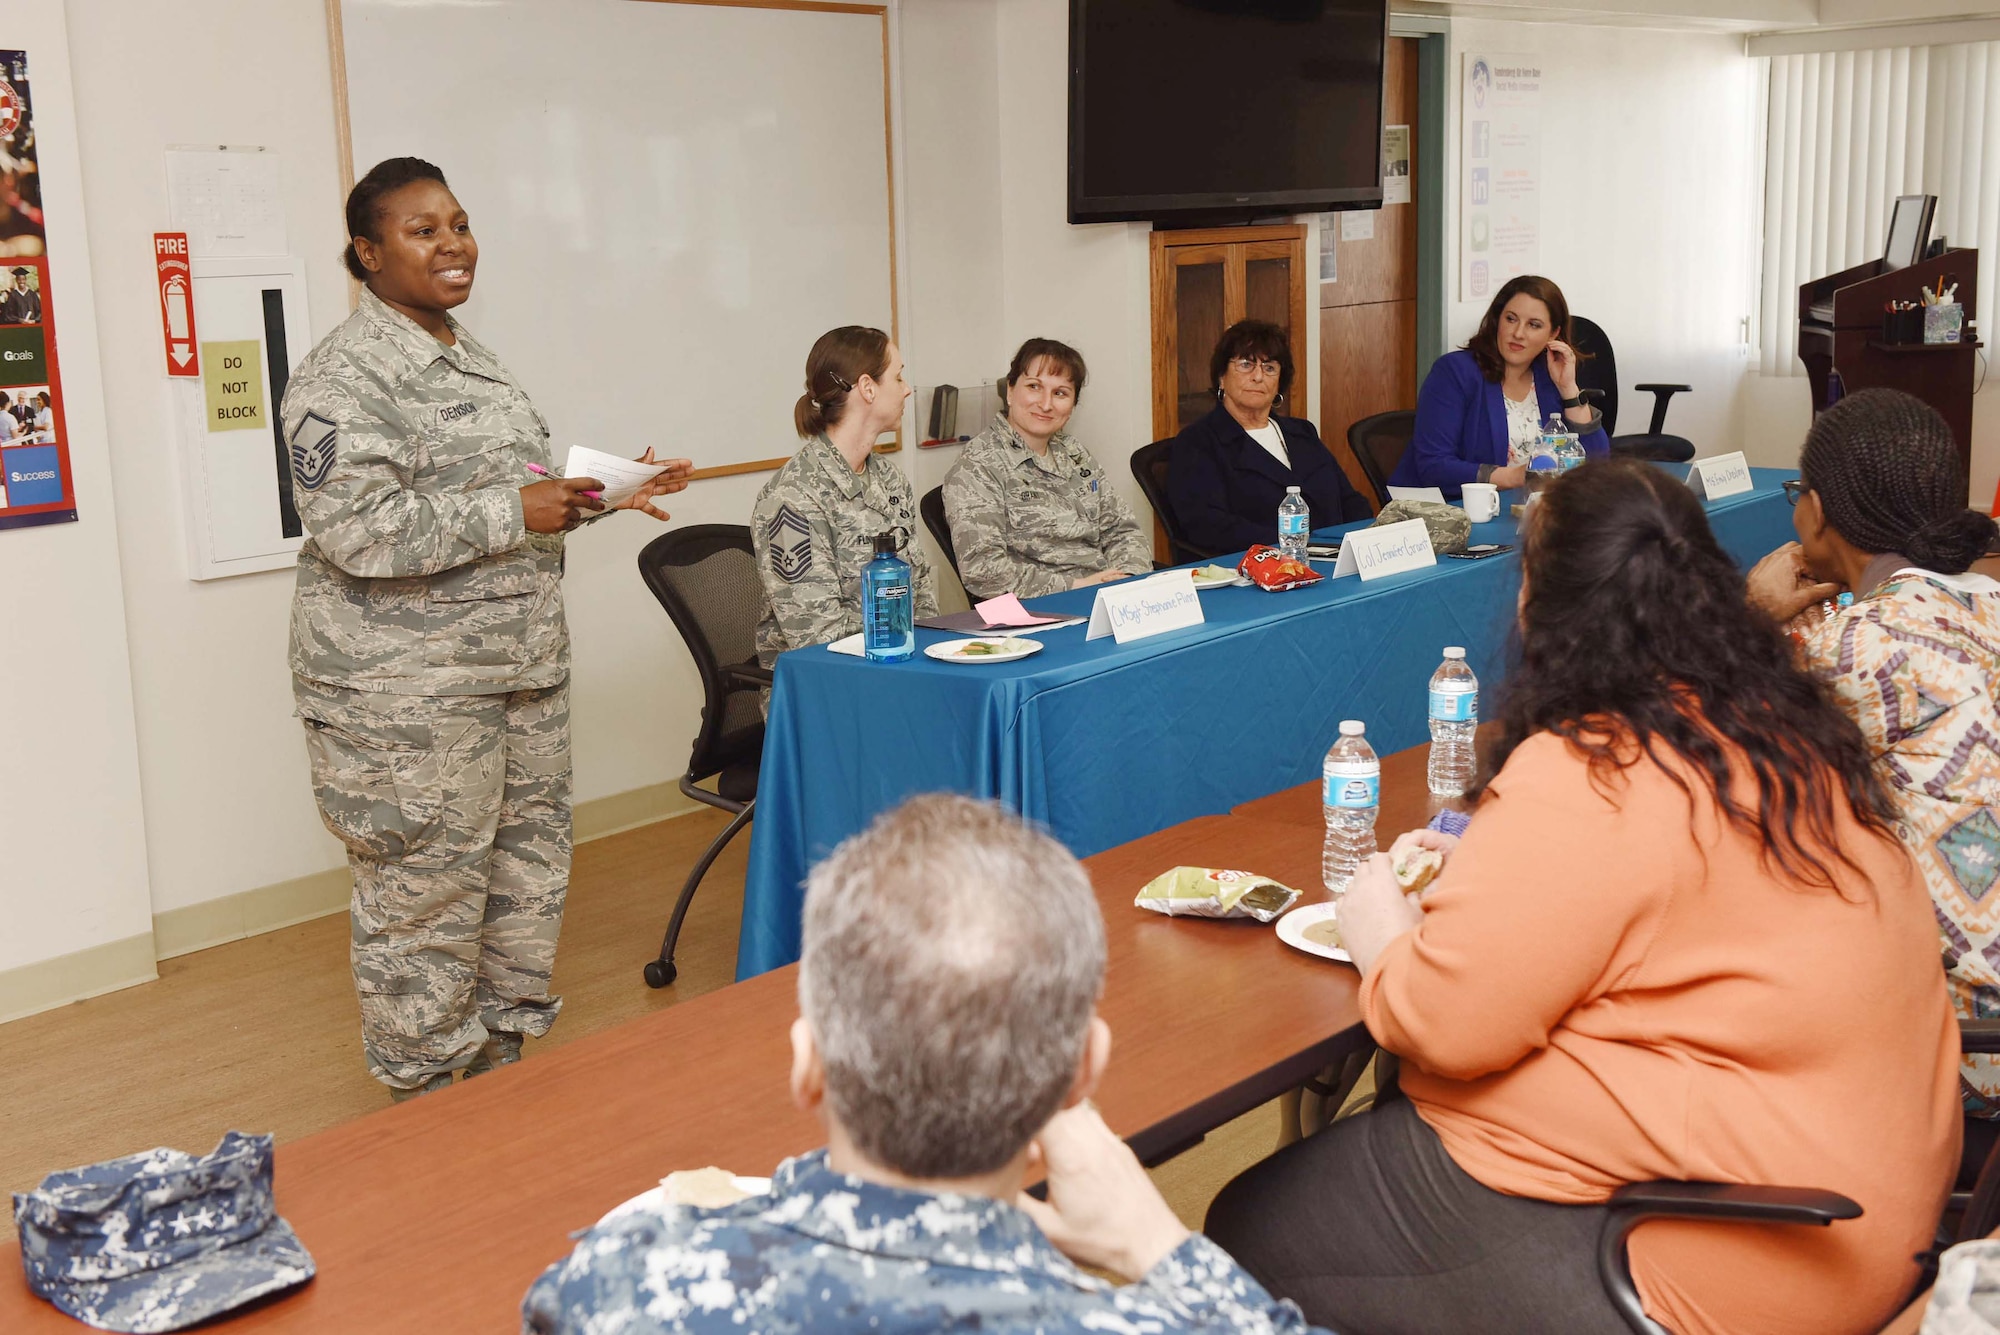 Master Sgt. Lashandra Denson, 30th Civil Engineer Squadron engineering flight superintendent, speaks during the Women’s History Month lunch and learn at the Airman and Family Readiness Center, March 23, 2016, Vandenberg Air Force Base, Calif. The event provided mentorship to women on how to navigate the Air Force in male-dominant career fields, life as a public official and the civilian workforce. (U.S. Air Force photo by Tech. Sgt. Jim Araos/Released)